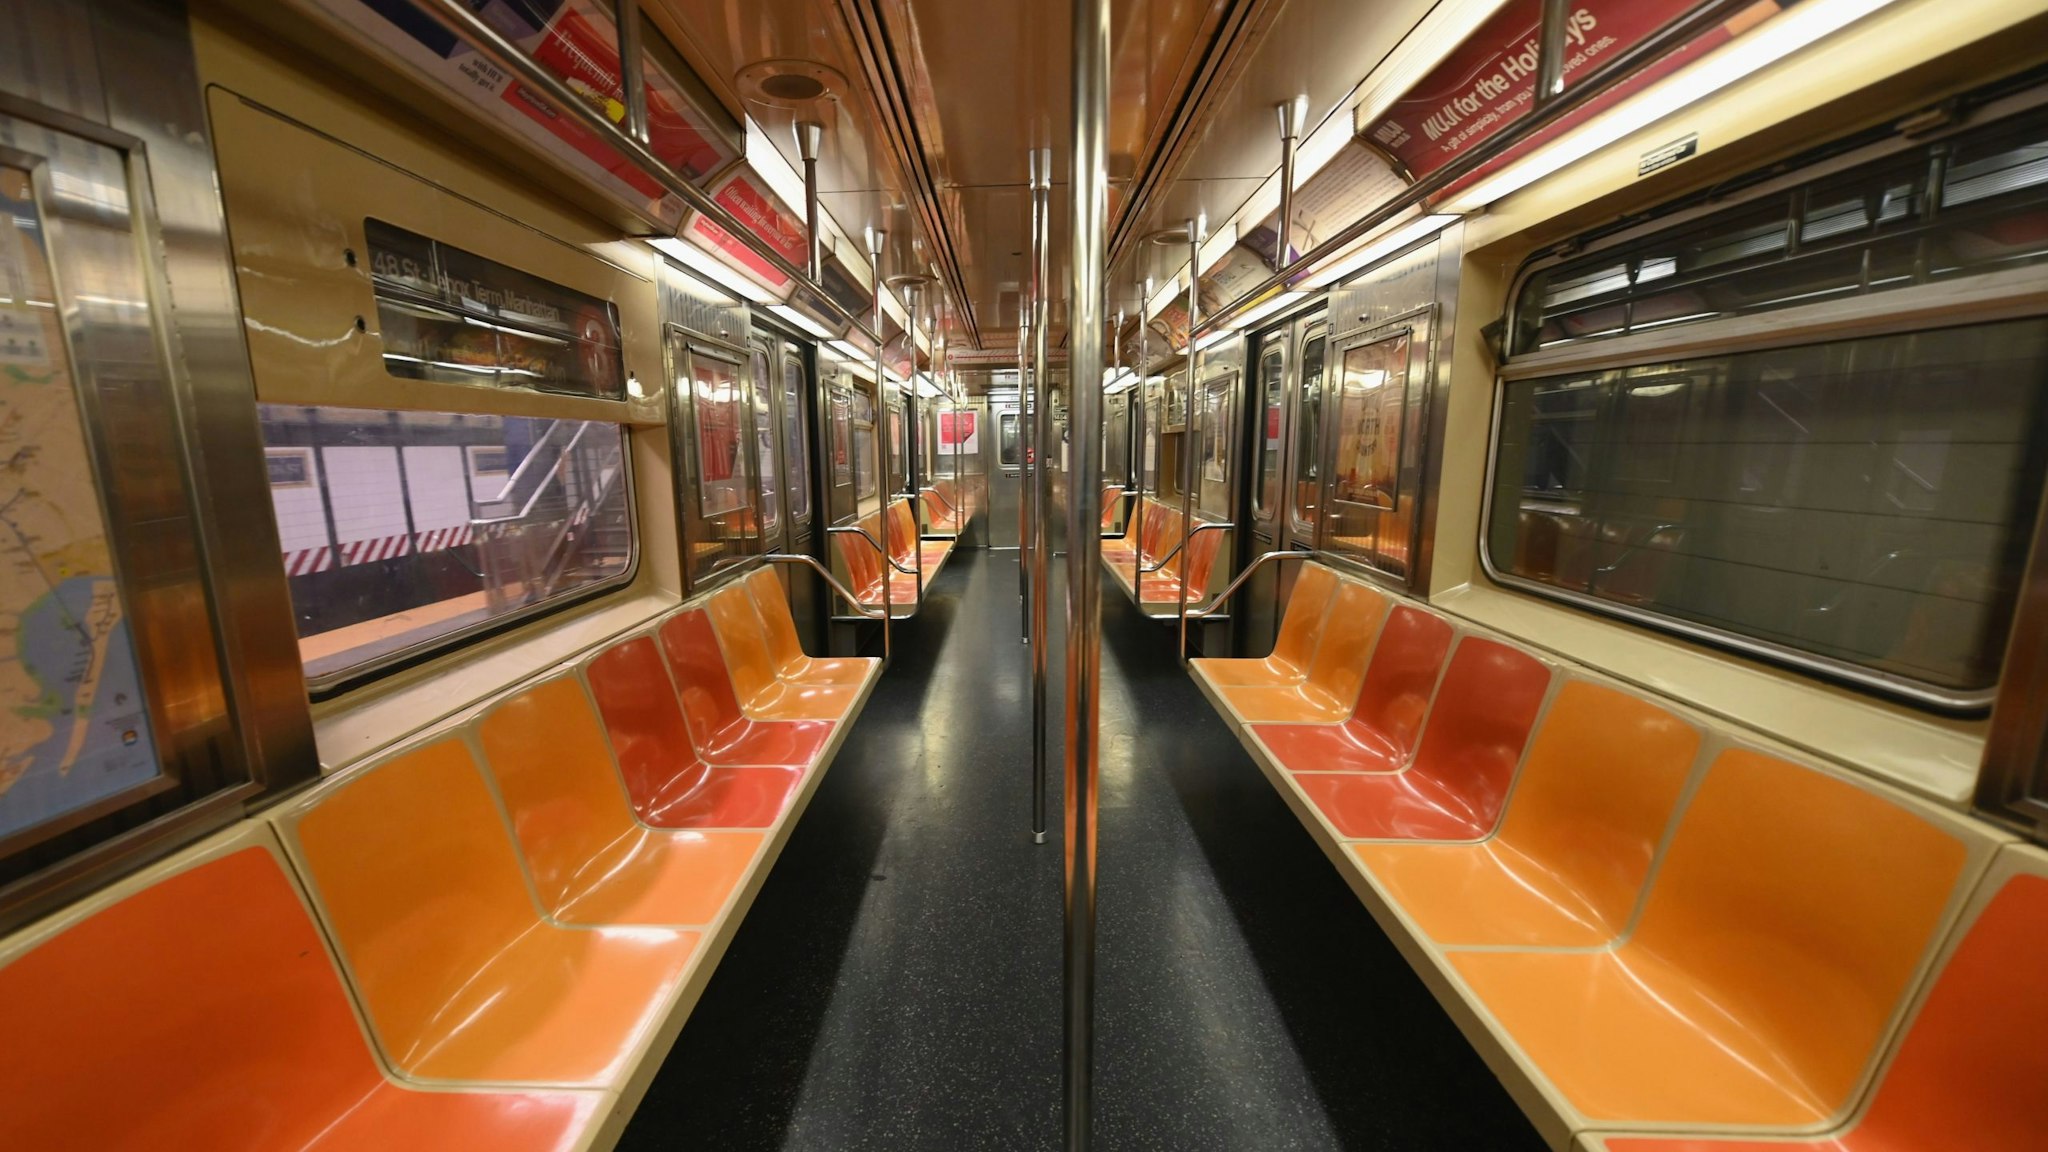 TOPSHOT - An empty New York Subway car is seen on March 23, 2020 in New York City. - Wall Street fell early March 23, 2020 as Congress wrangled over a massive stimulus package while the Federal Reserve unveiled new emergency programs to boost the economy including with unlimited bond buying. About 45 minutes into trading, the Dow Jones Industrial Average was down 0.6 percent at 19,053.17, and the broad-based S&P 500 also fell 0.6 percent to 2,290.31 after regaining some ground lost just after the open. (Photo by Angela Weiss / AFP) (Photo by ANGELA WEISS/AFP via Getty Image